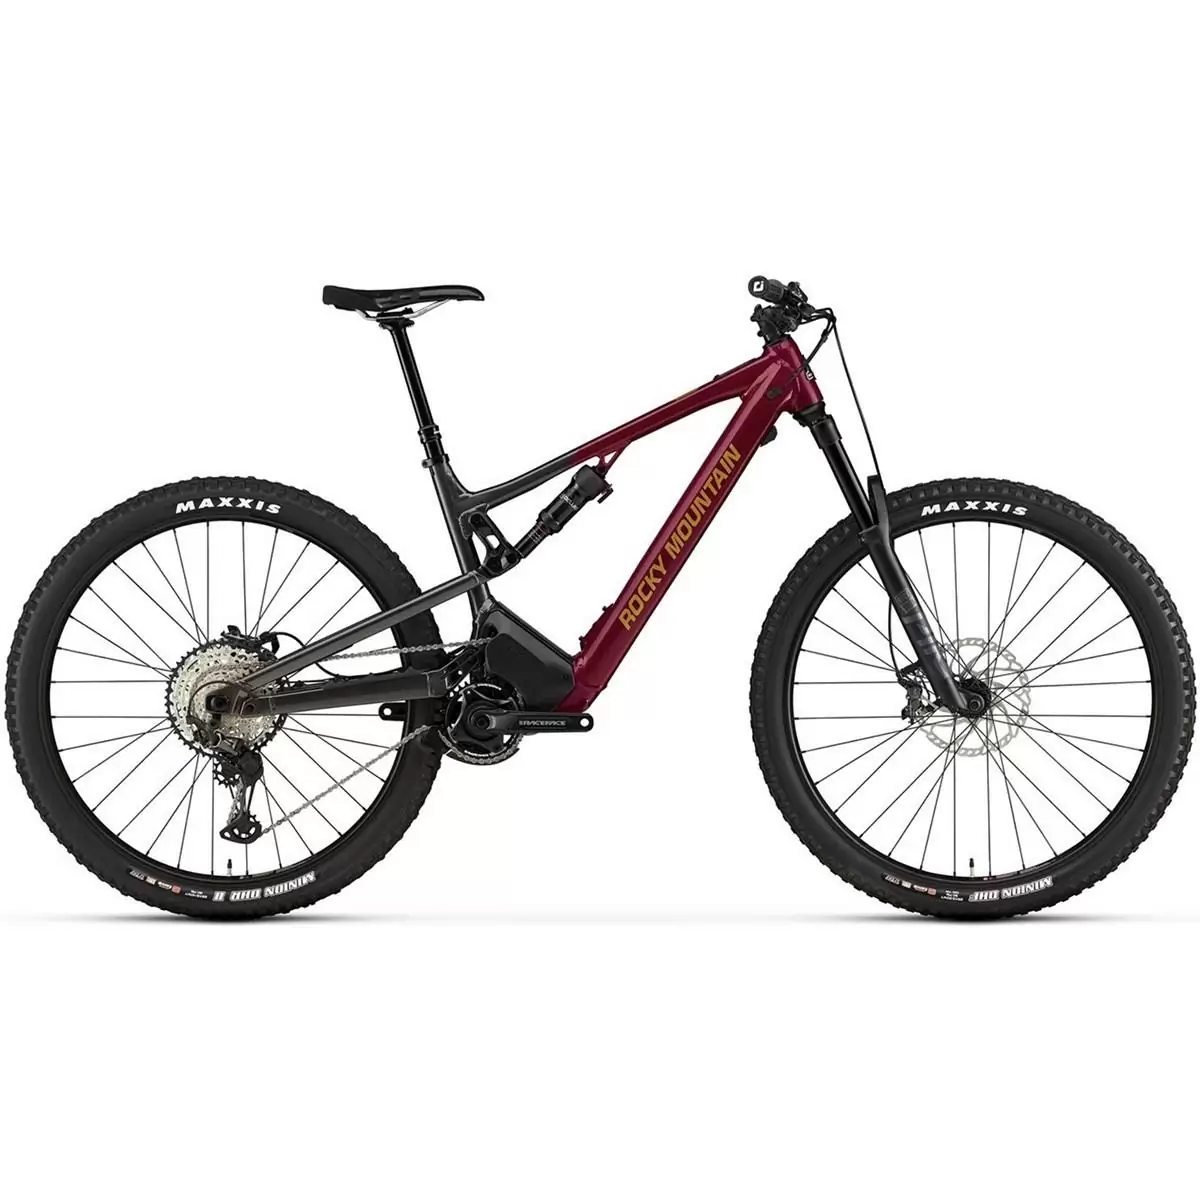 Instinct PowerPlay Alloy 70 29'' 150mm 12s 720Wh Grey/Red Size L - image